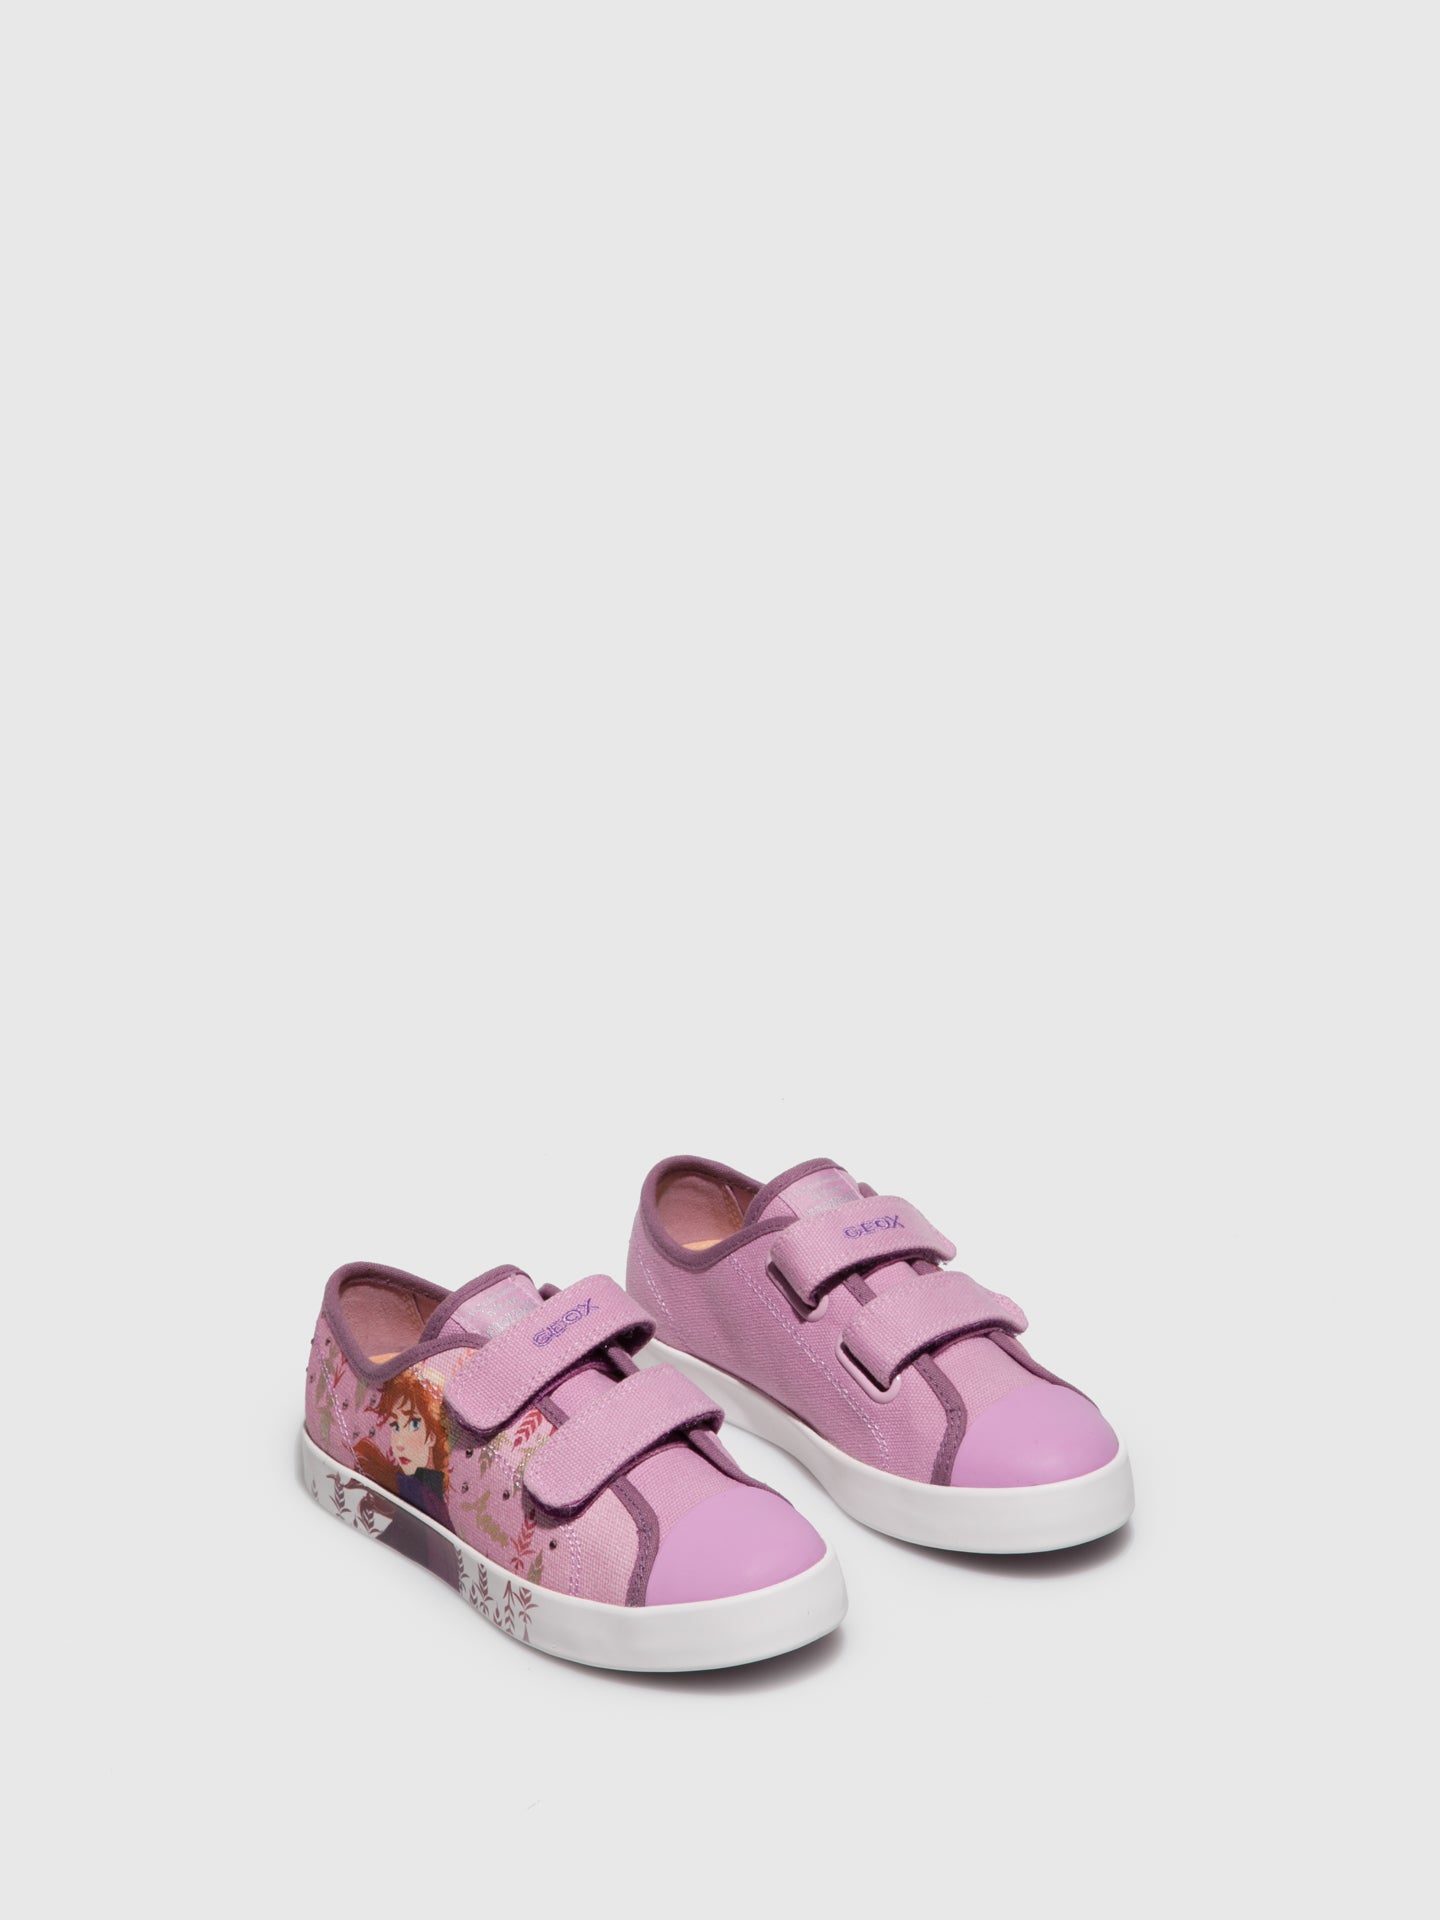 Geox HotPink Velcro Trainers